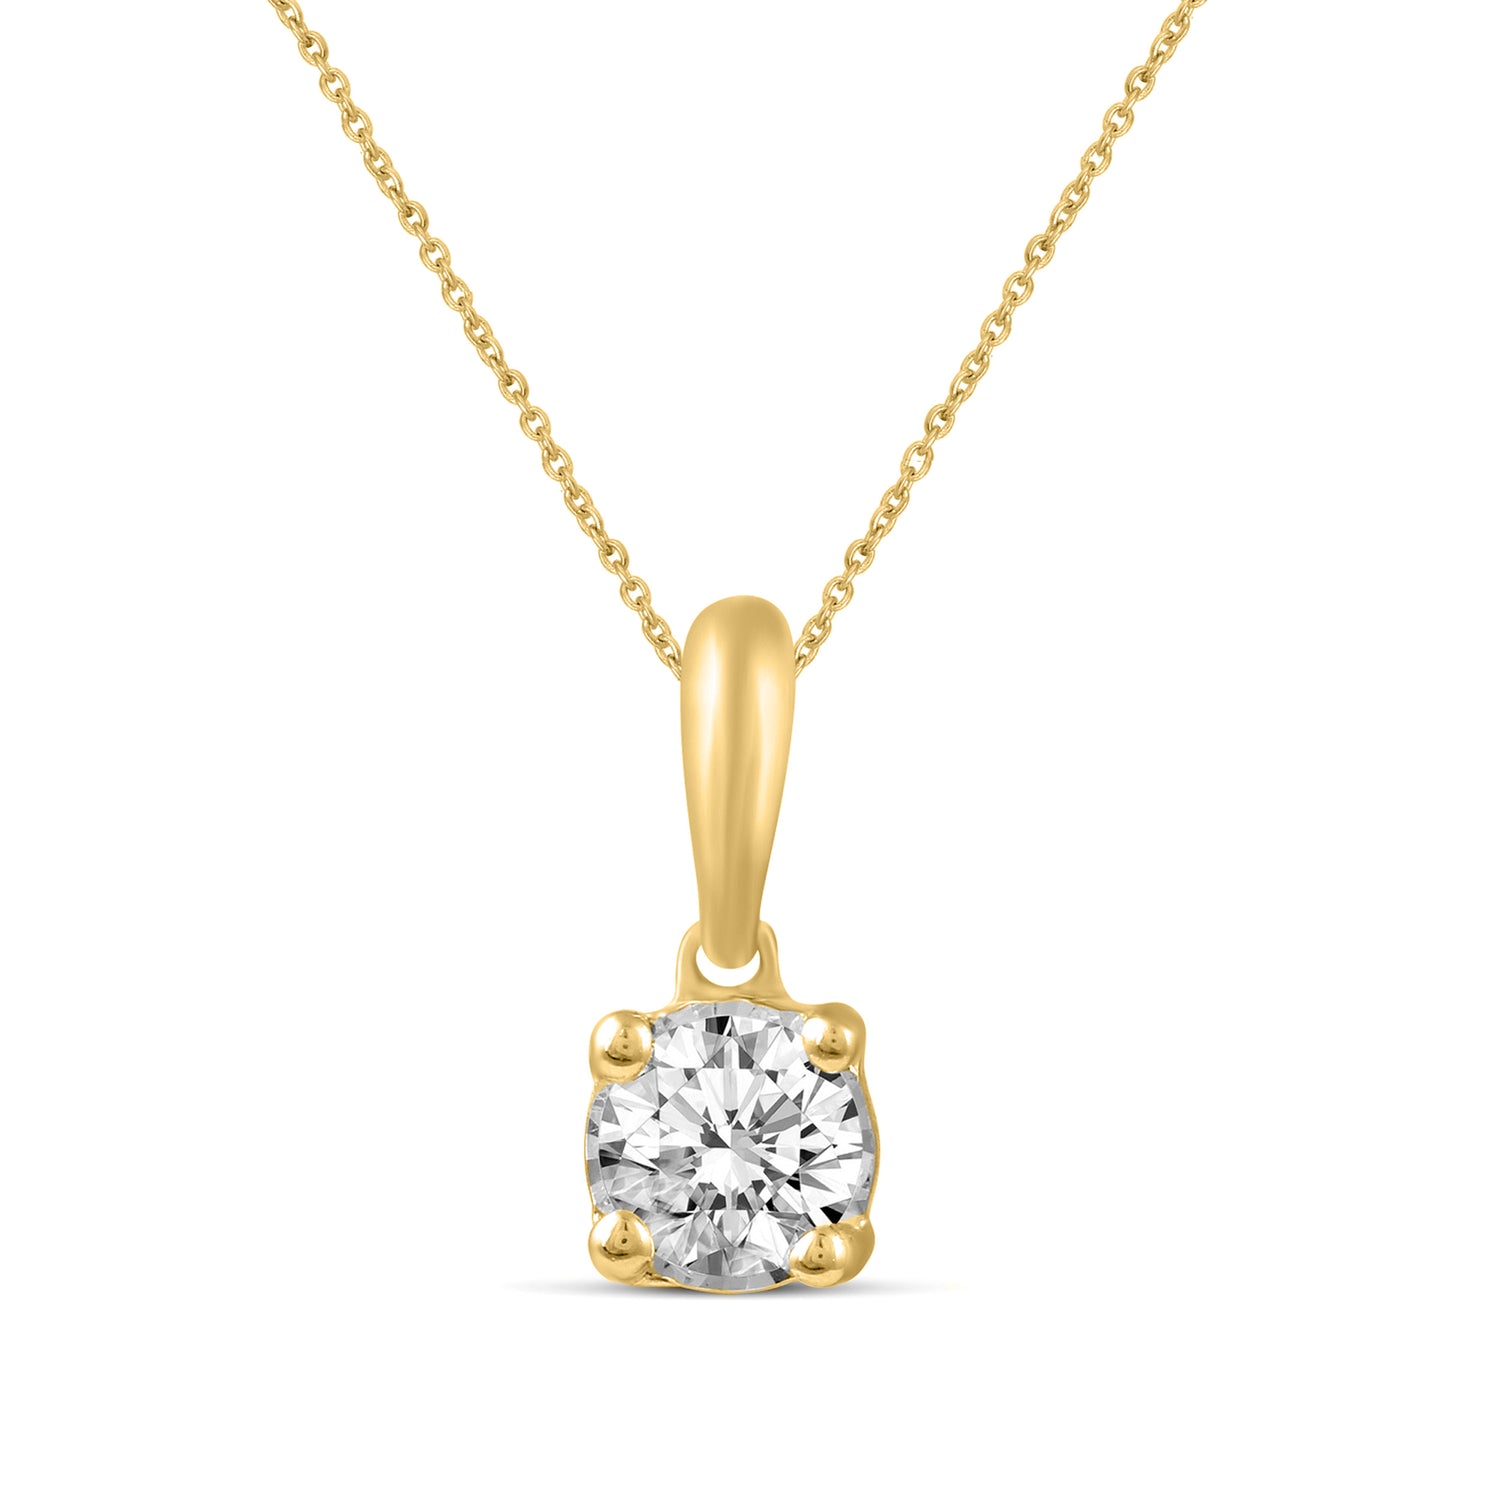 14K Gold 1/5 Carat TW Natural Round (I1-I2 Clarity) Diamond Pendant Necklace in White, Rose or Yellow Gold